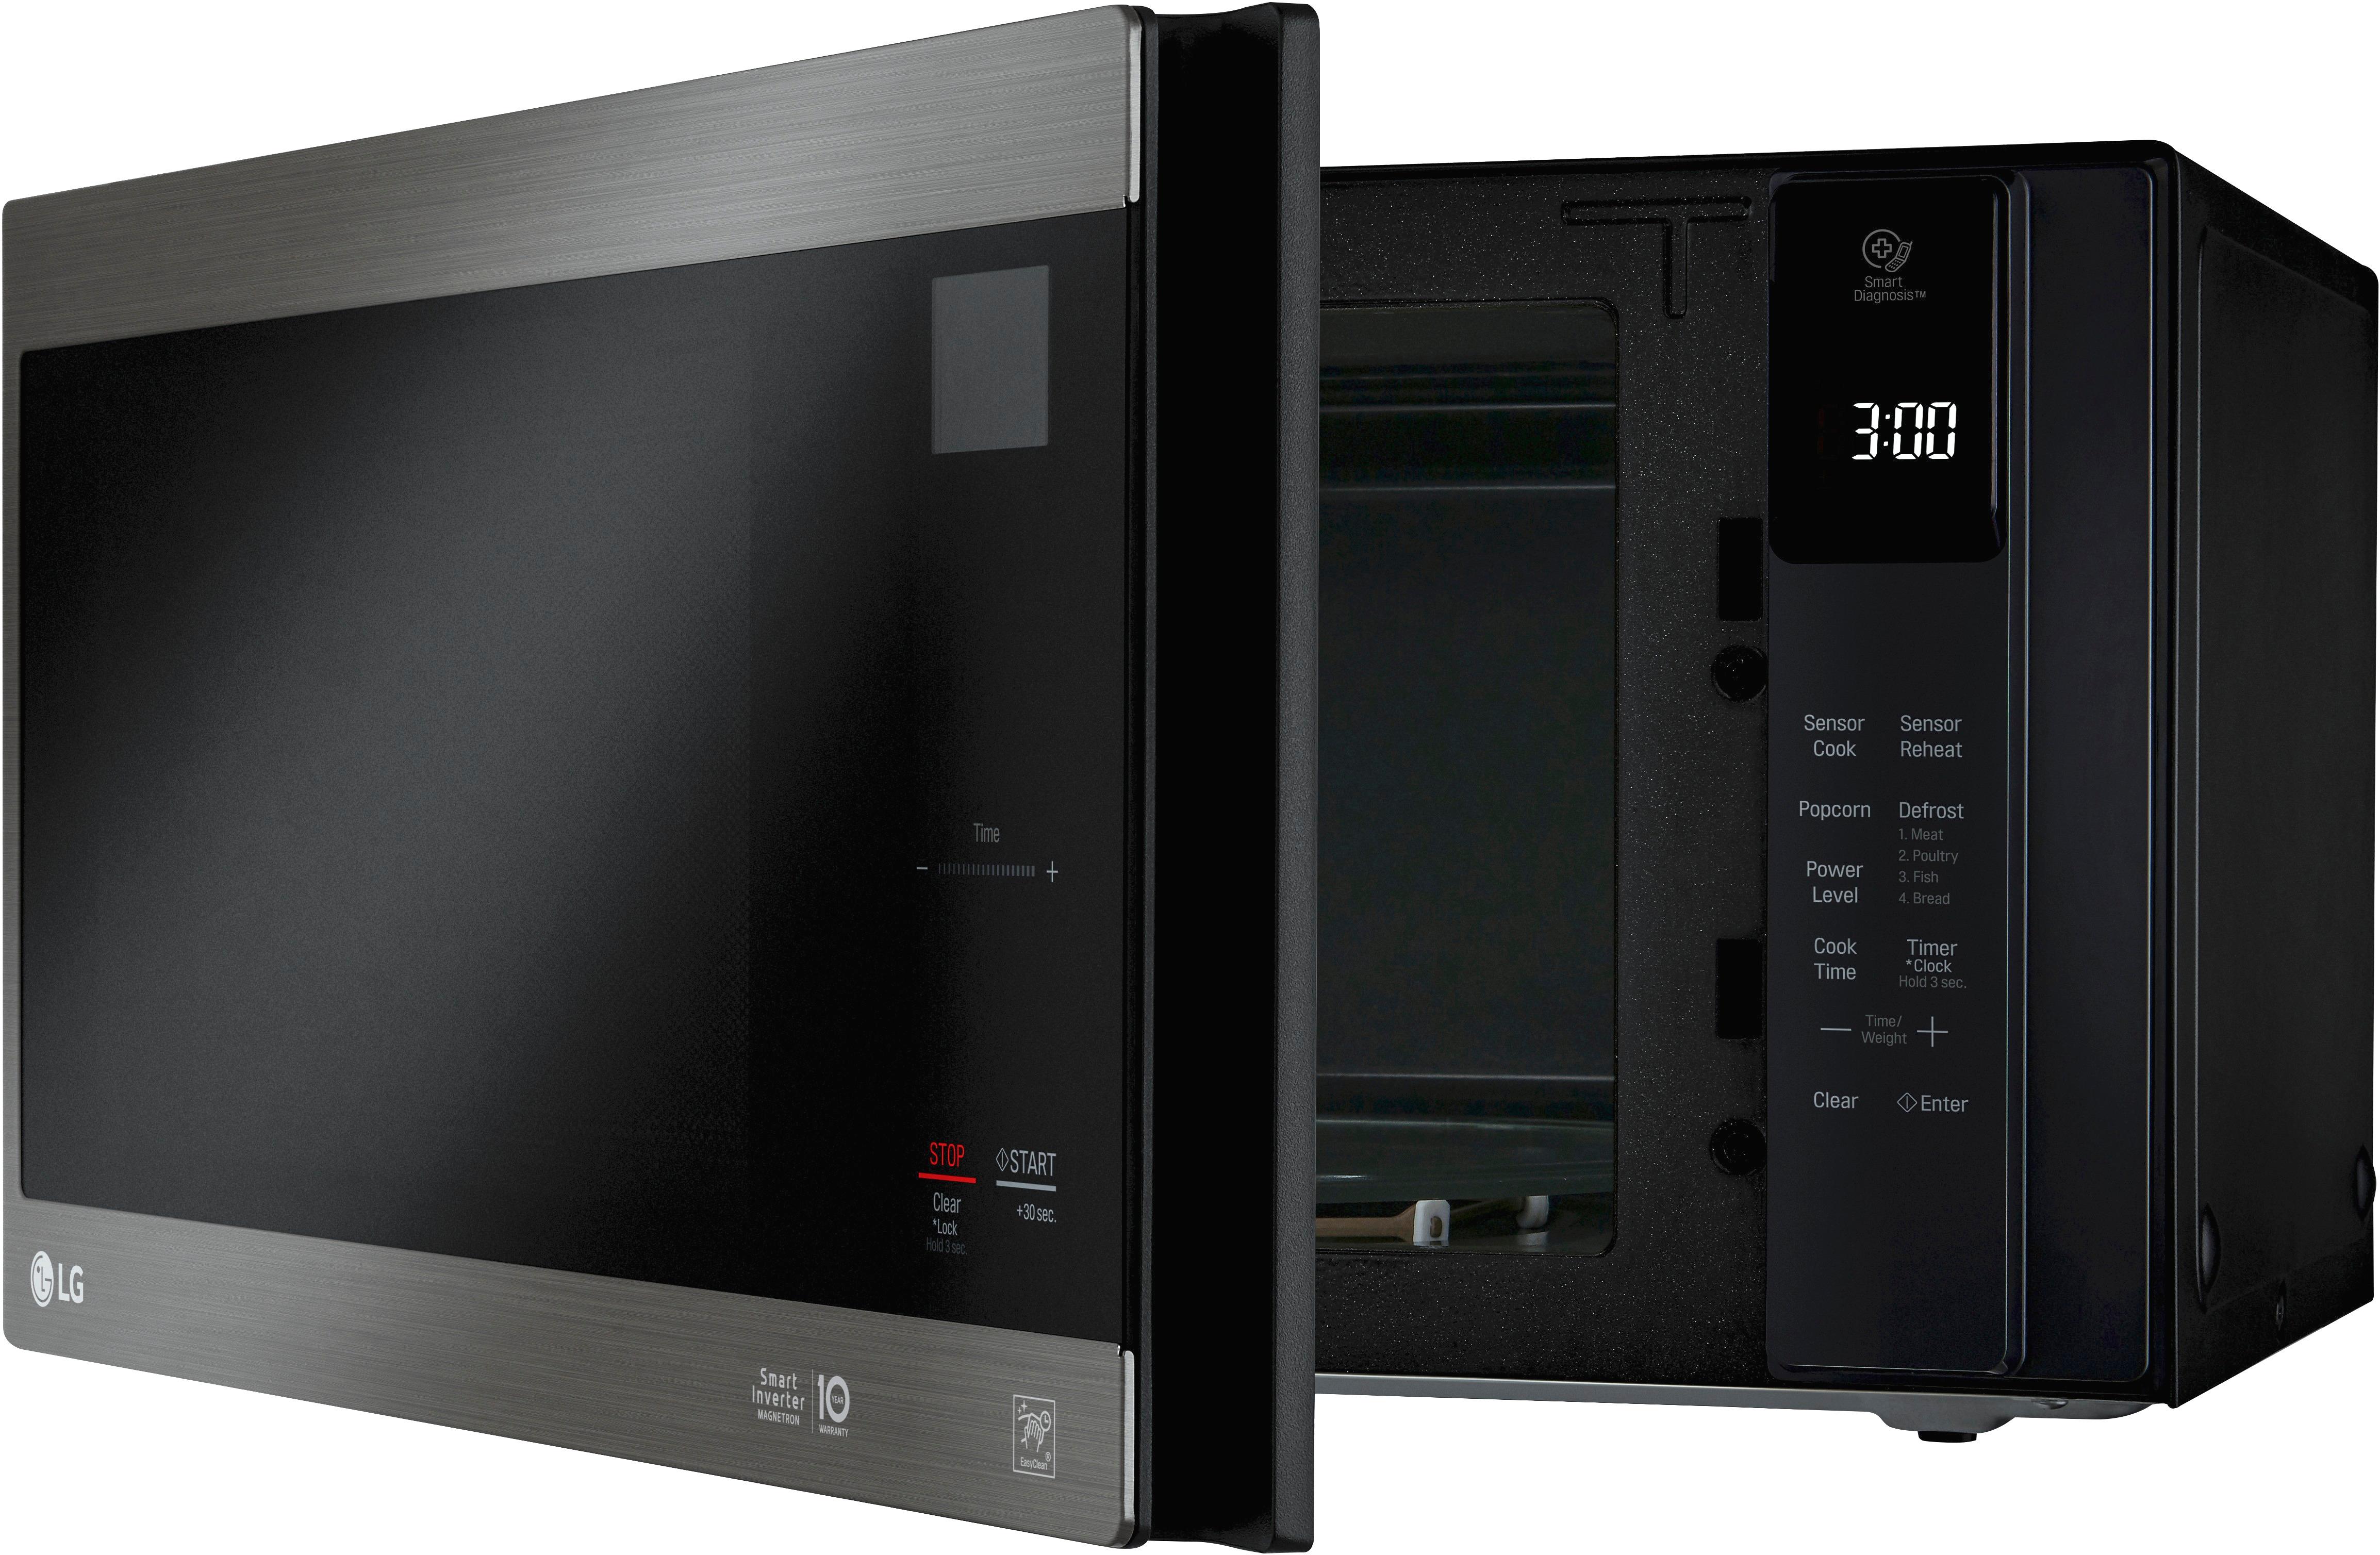 LG - NeoChef 1.5 Cu. Ft. Mid-Size Microwave - Black stainless steel